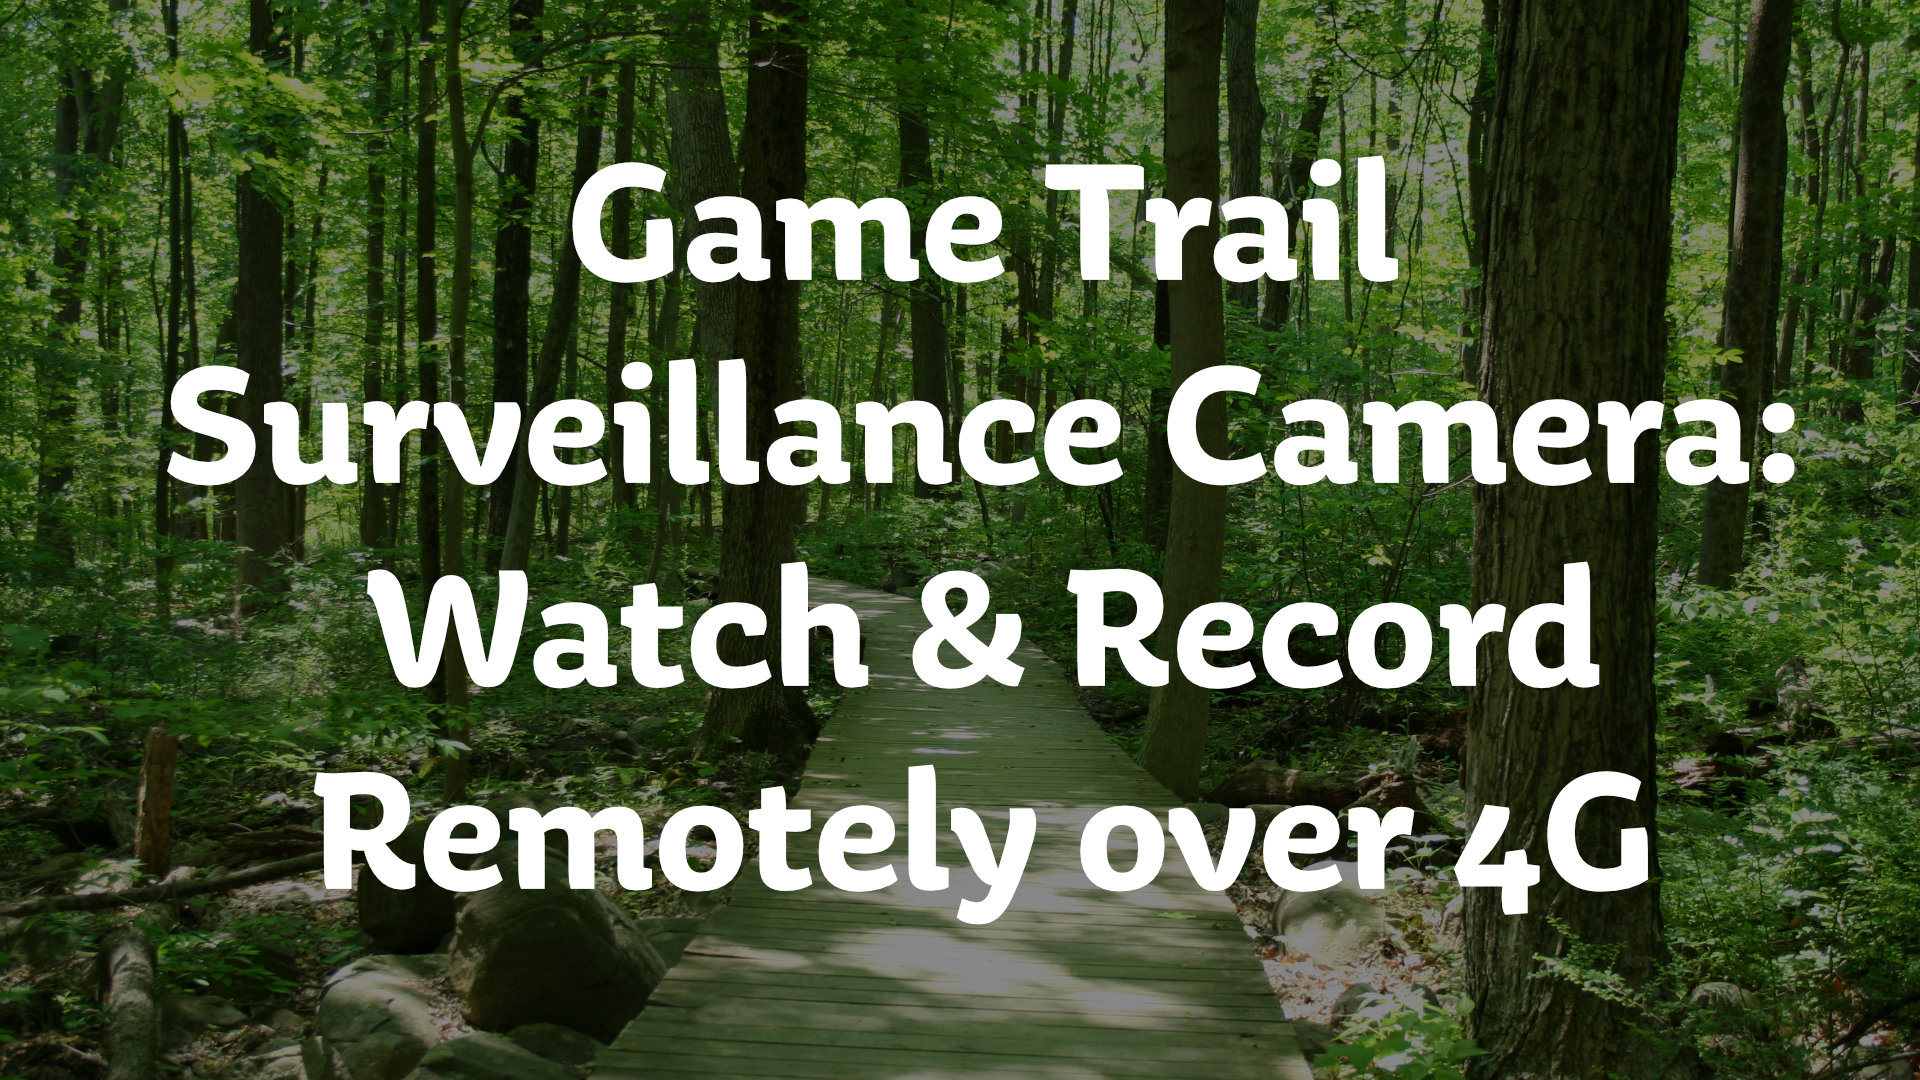 Game Trail Surveillance Camera: Watch & Record Remotely over 4G